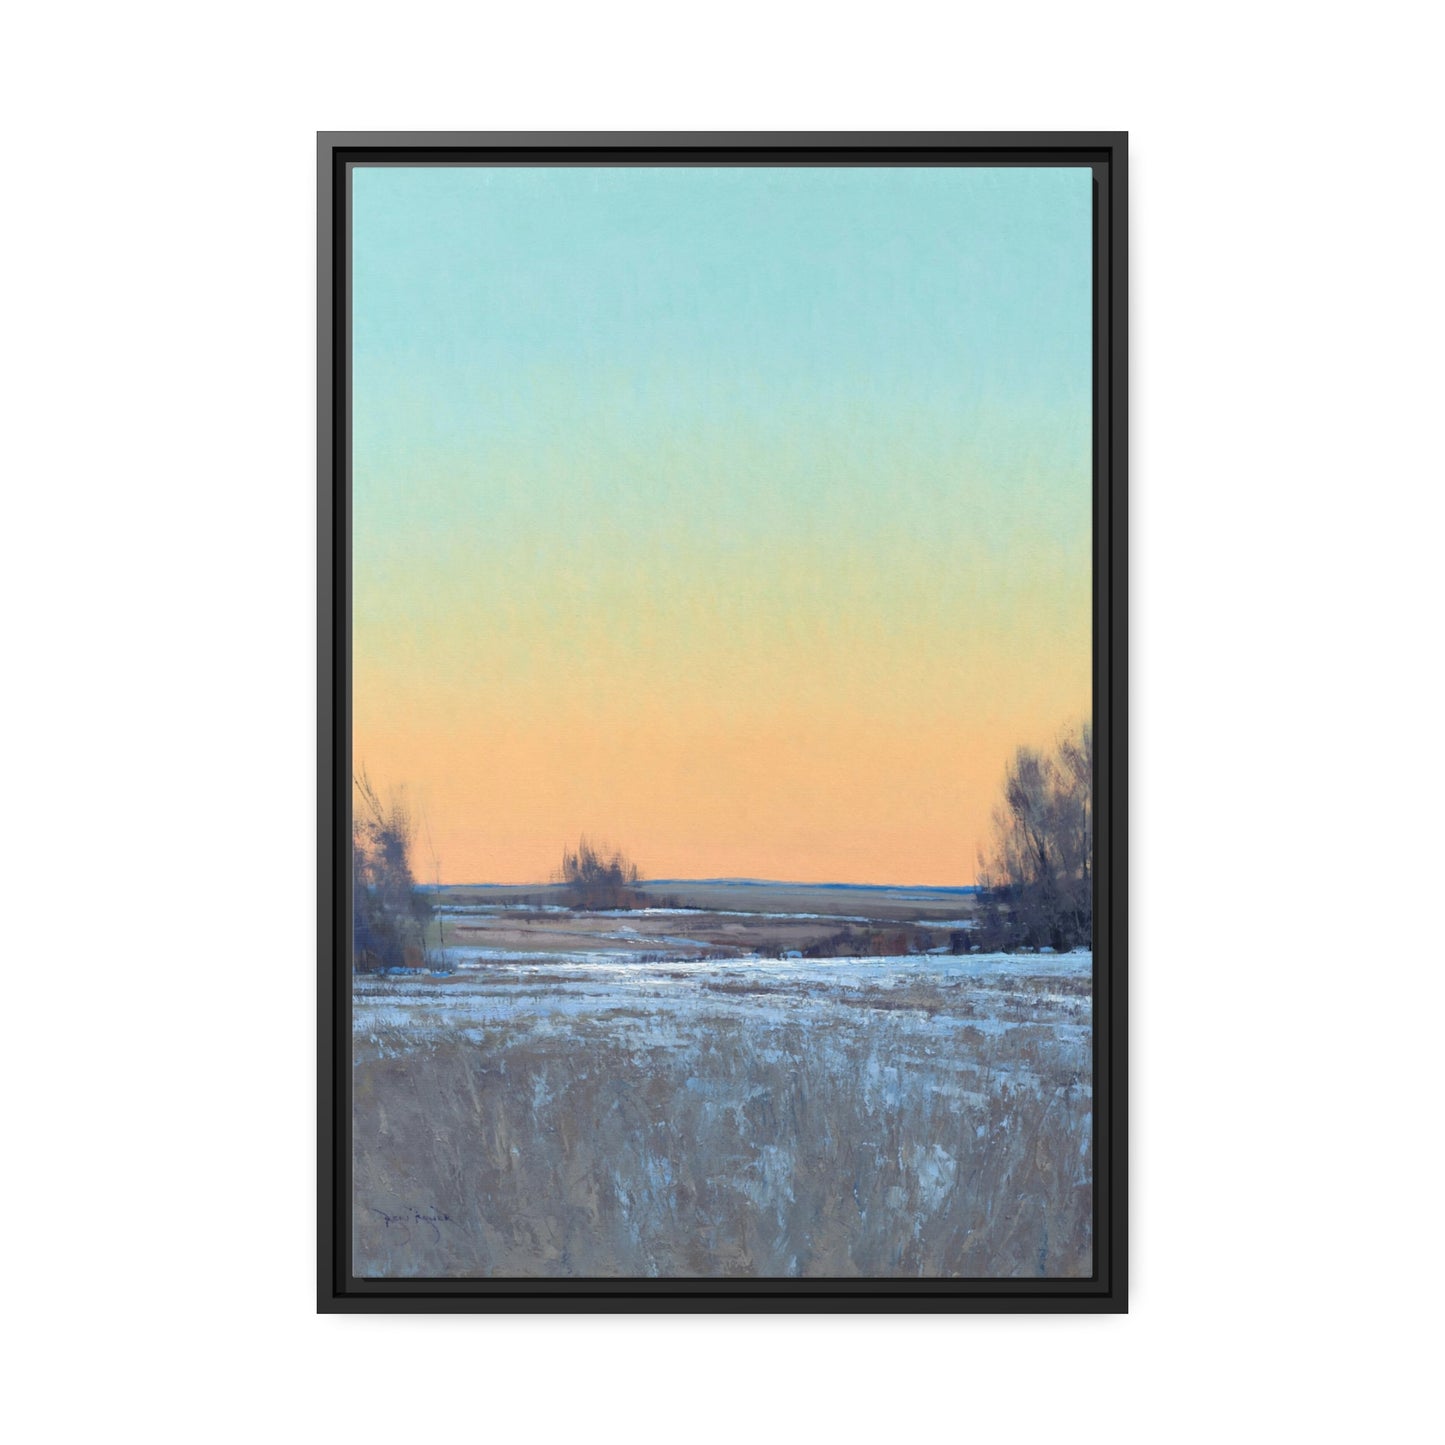 Ben Bauer: "Late Afternoon in March, Lowry, MN" - Framed Canvas Reproduction